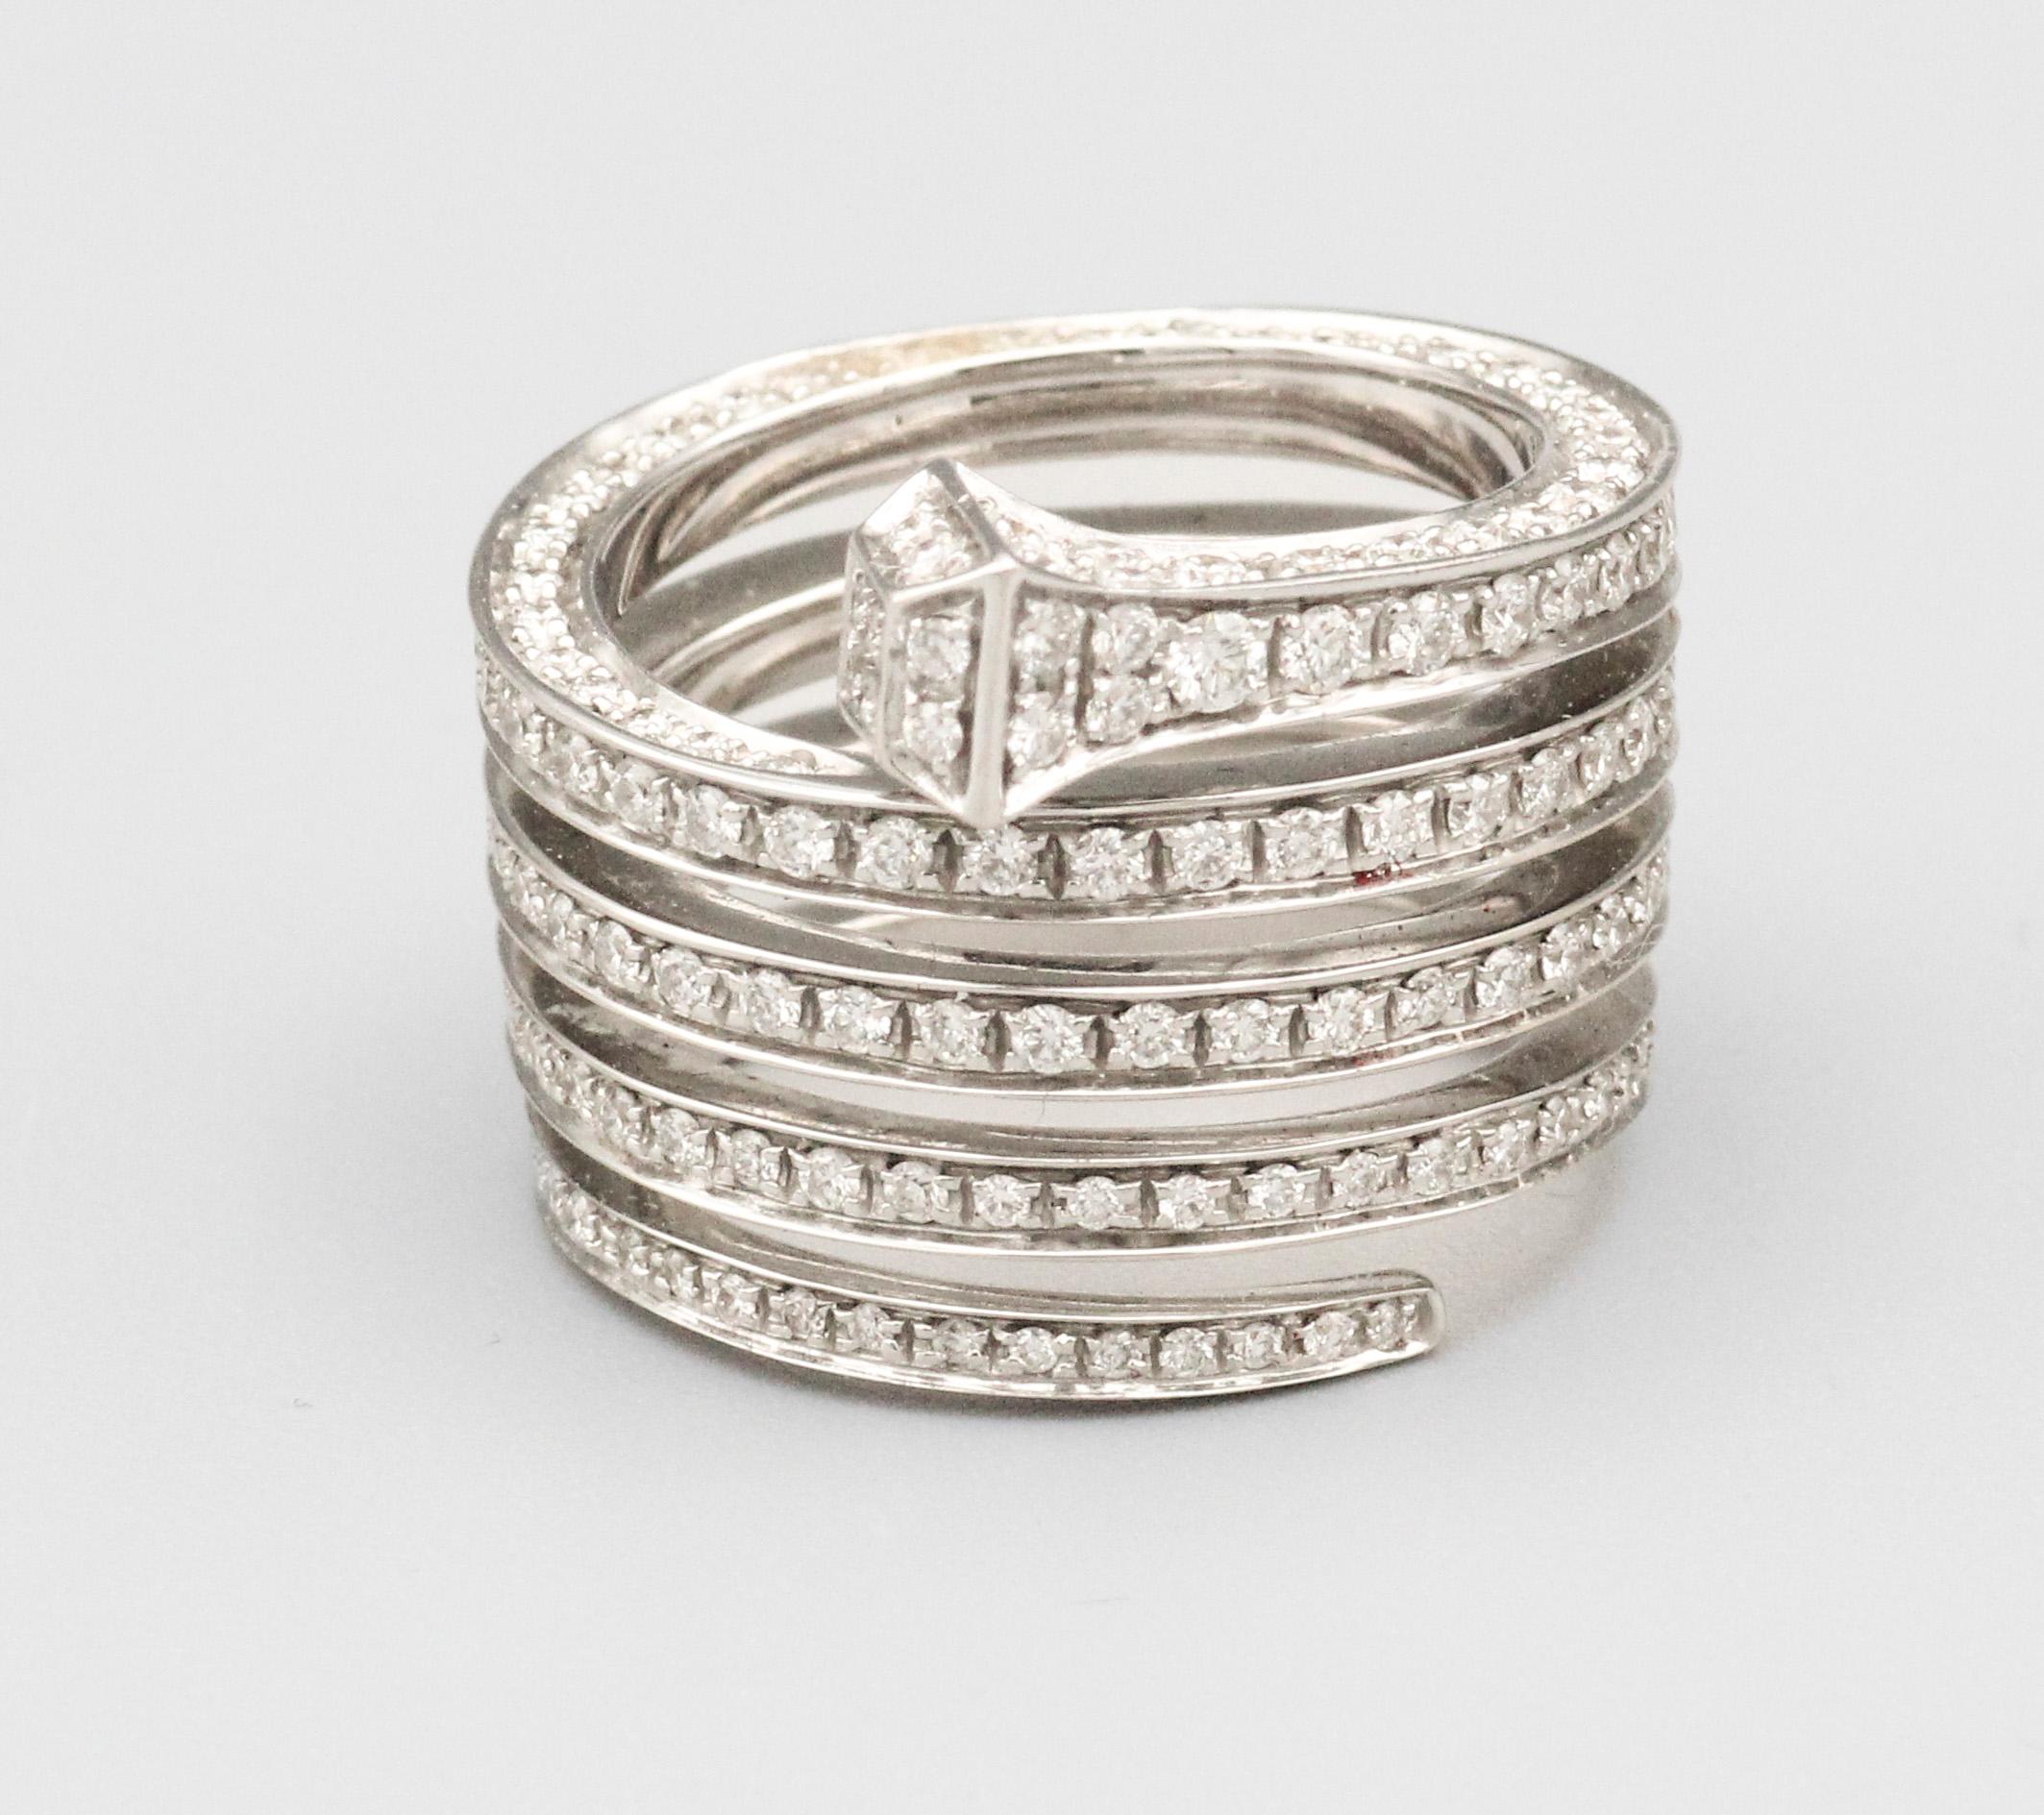 Introducing the Gucci Chiodo Diamond 18K White Gold Wrap Around Nail Ring—a captivating fusion of modern edge and timeless luxury. Crafted by the iconic Italian fashion house, Gucci, this ring is a bold expression of individuality and